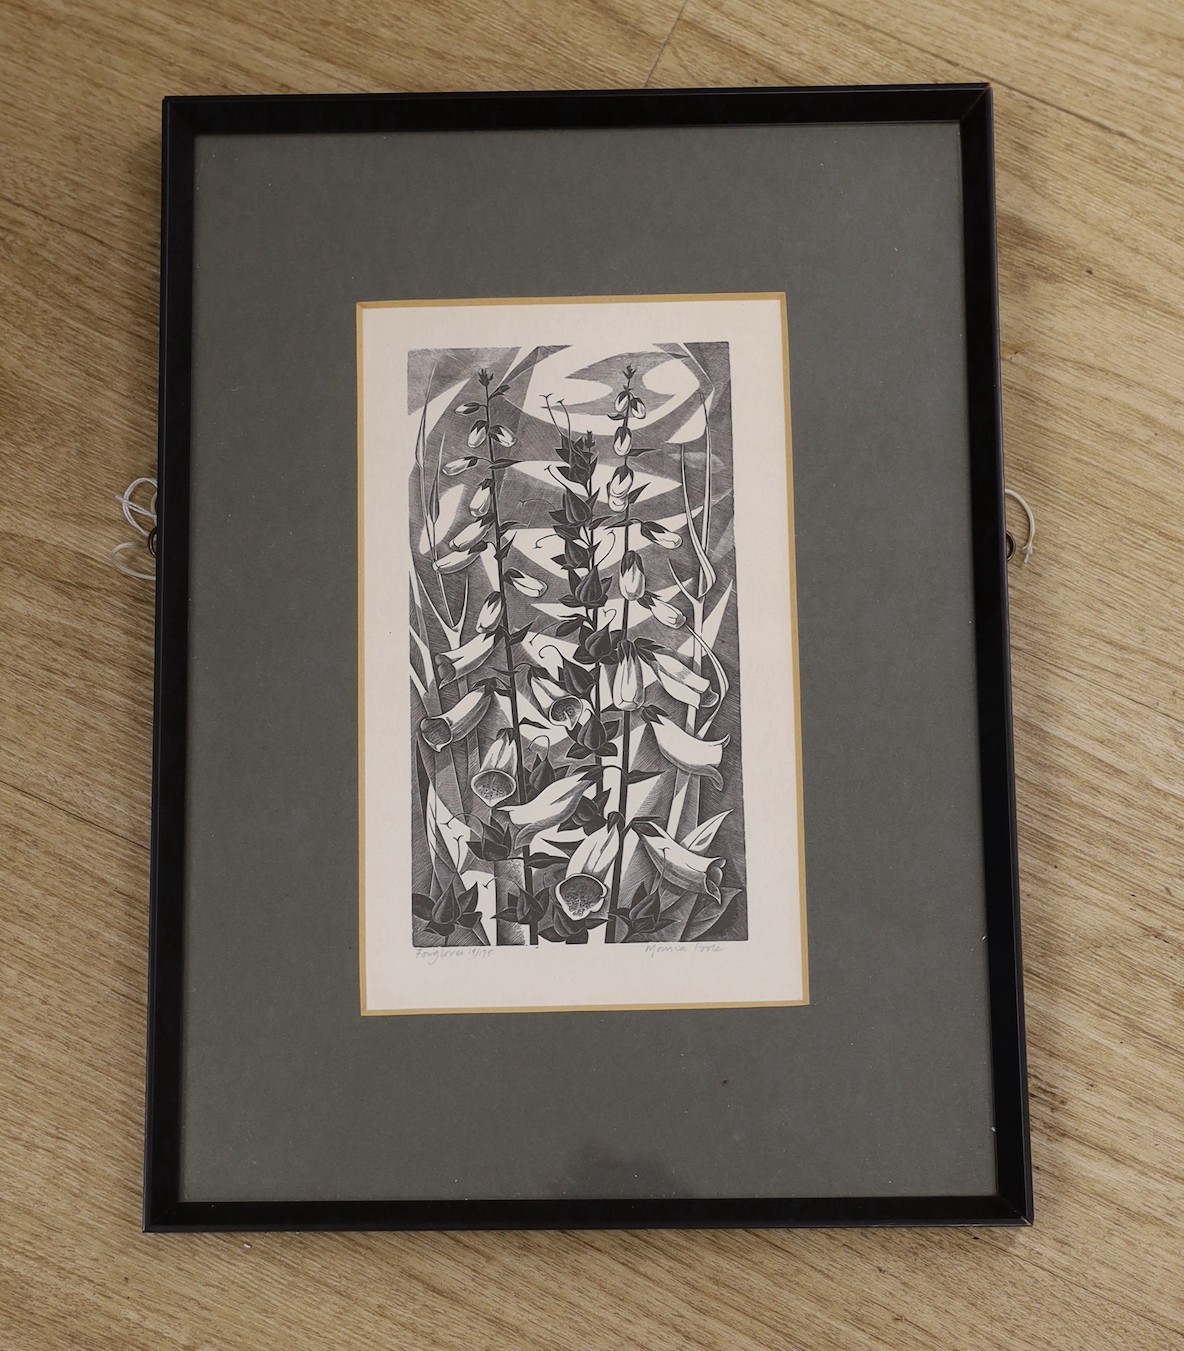 Monica Poole (1921-2003), wood engraving, 'Foxgloves', signed in pencil, 19/172, 20 x 11cm